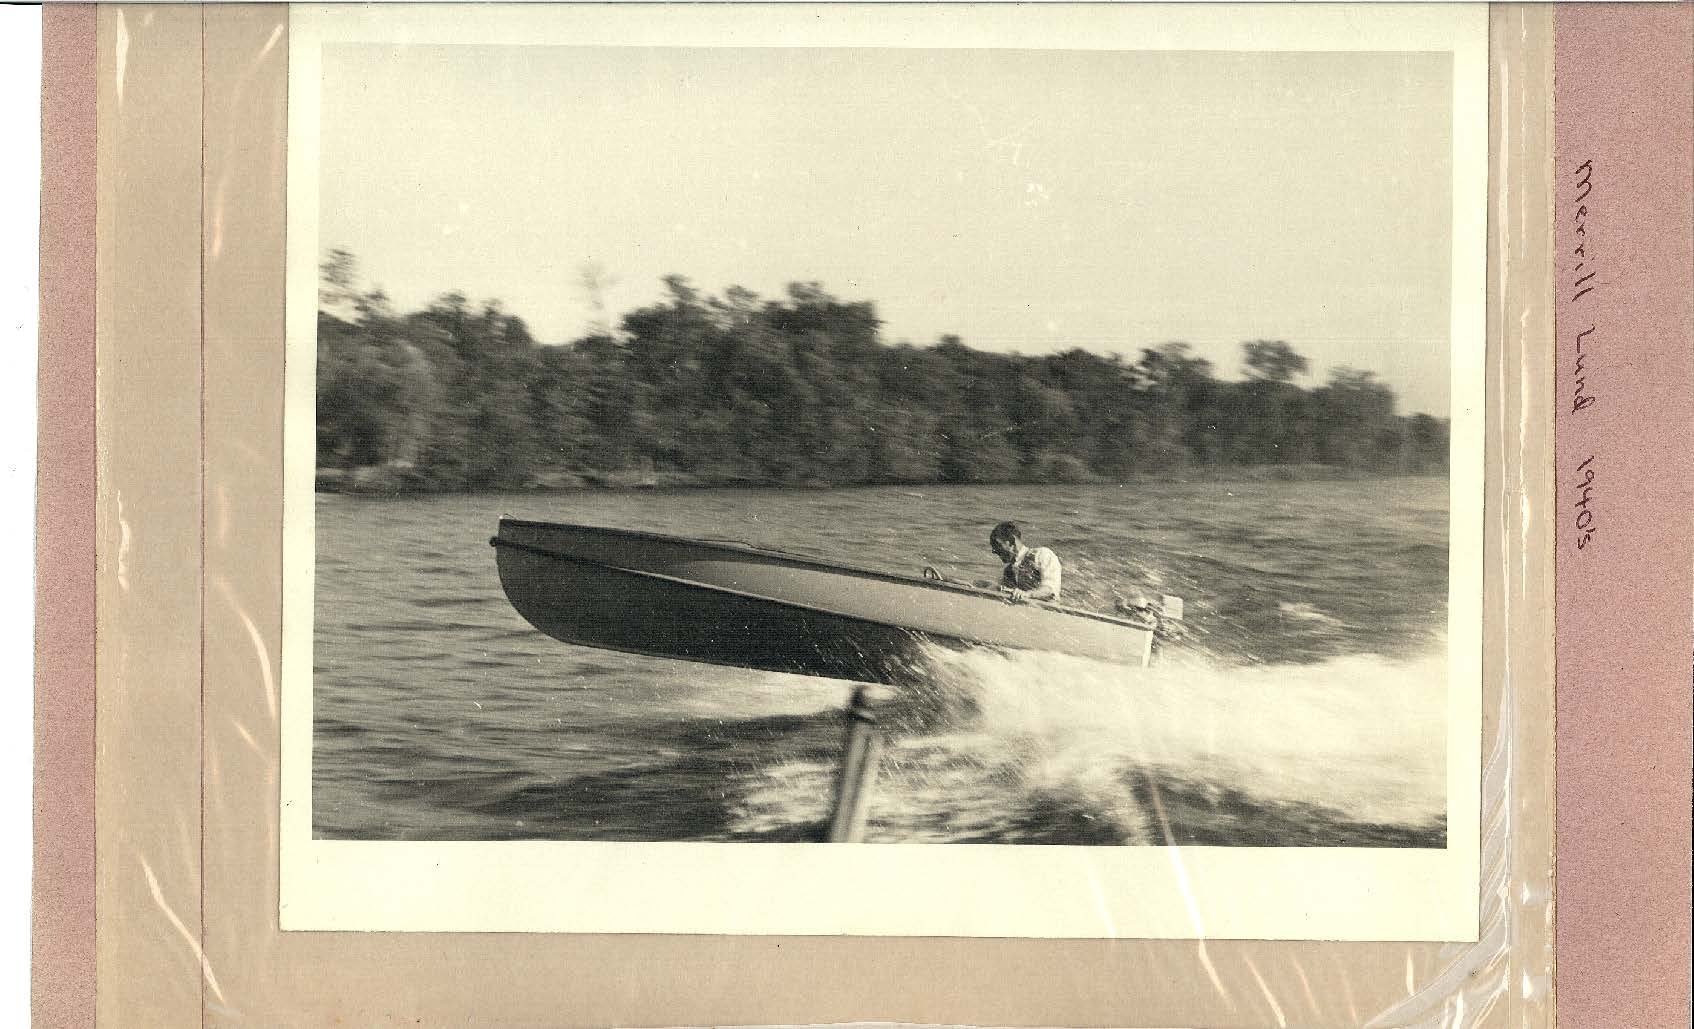 Photo "Merrill Lund 1940's" shows small race boat